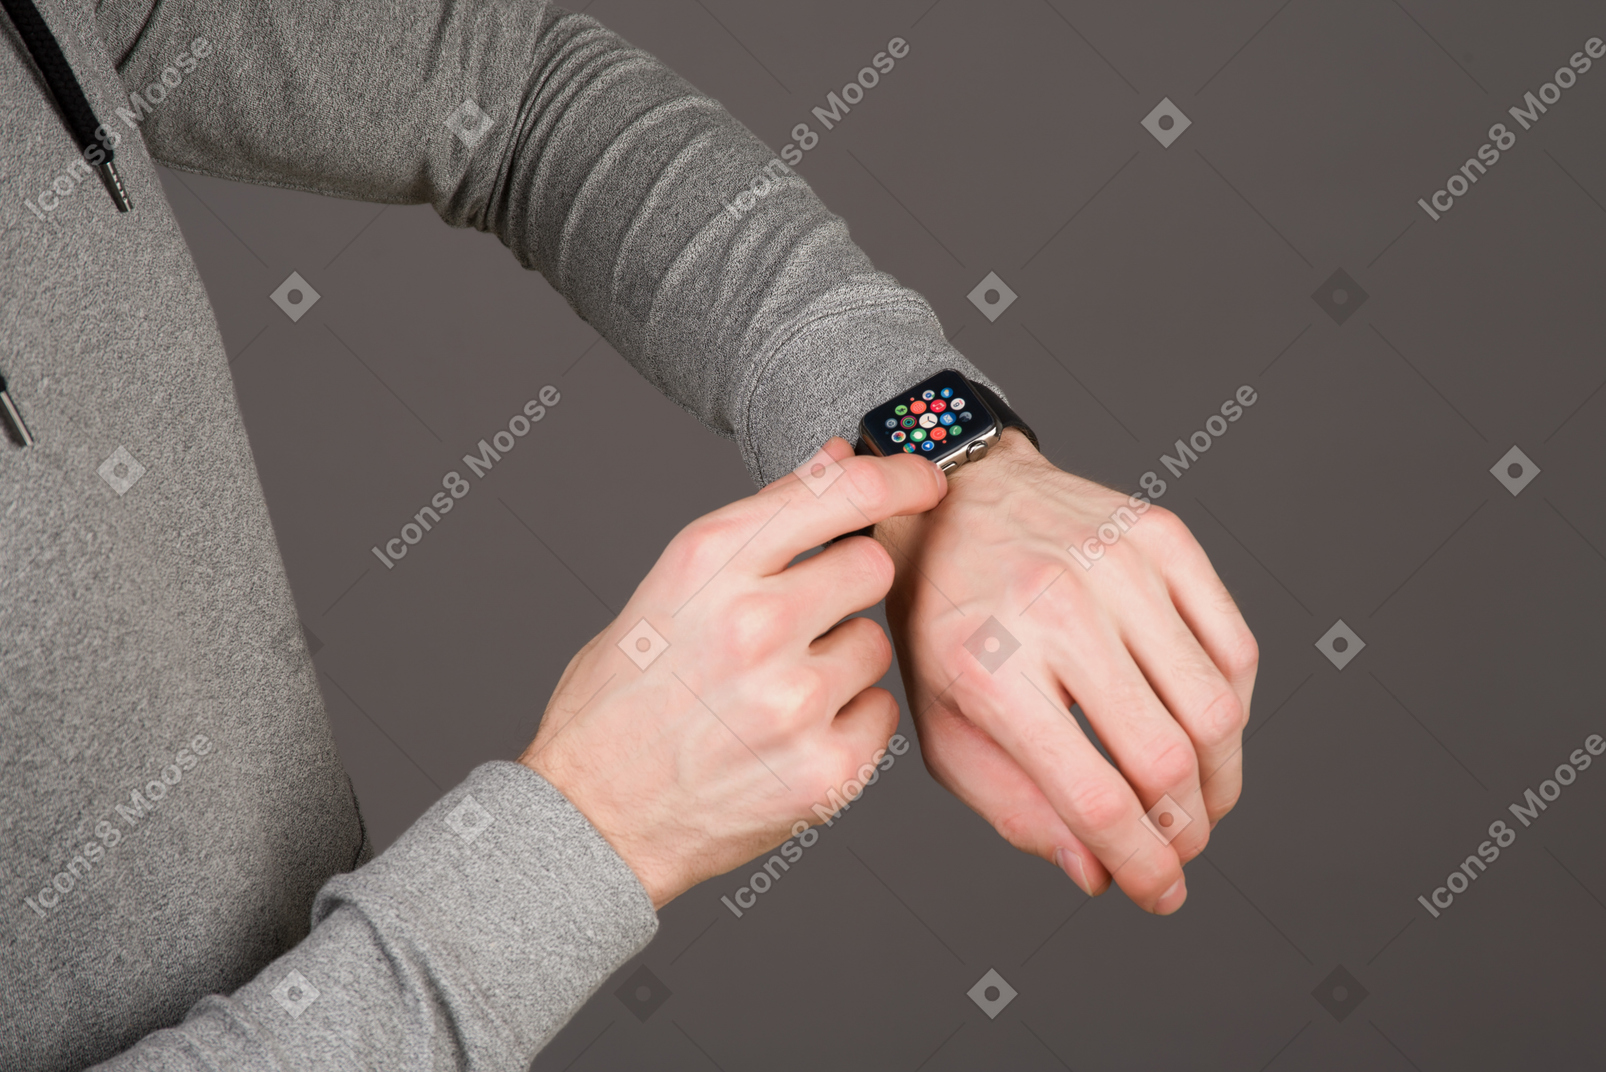 Checking his smartwatch